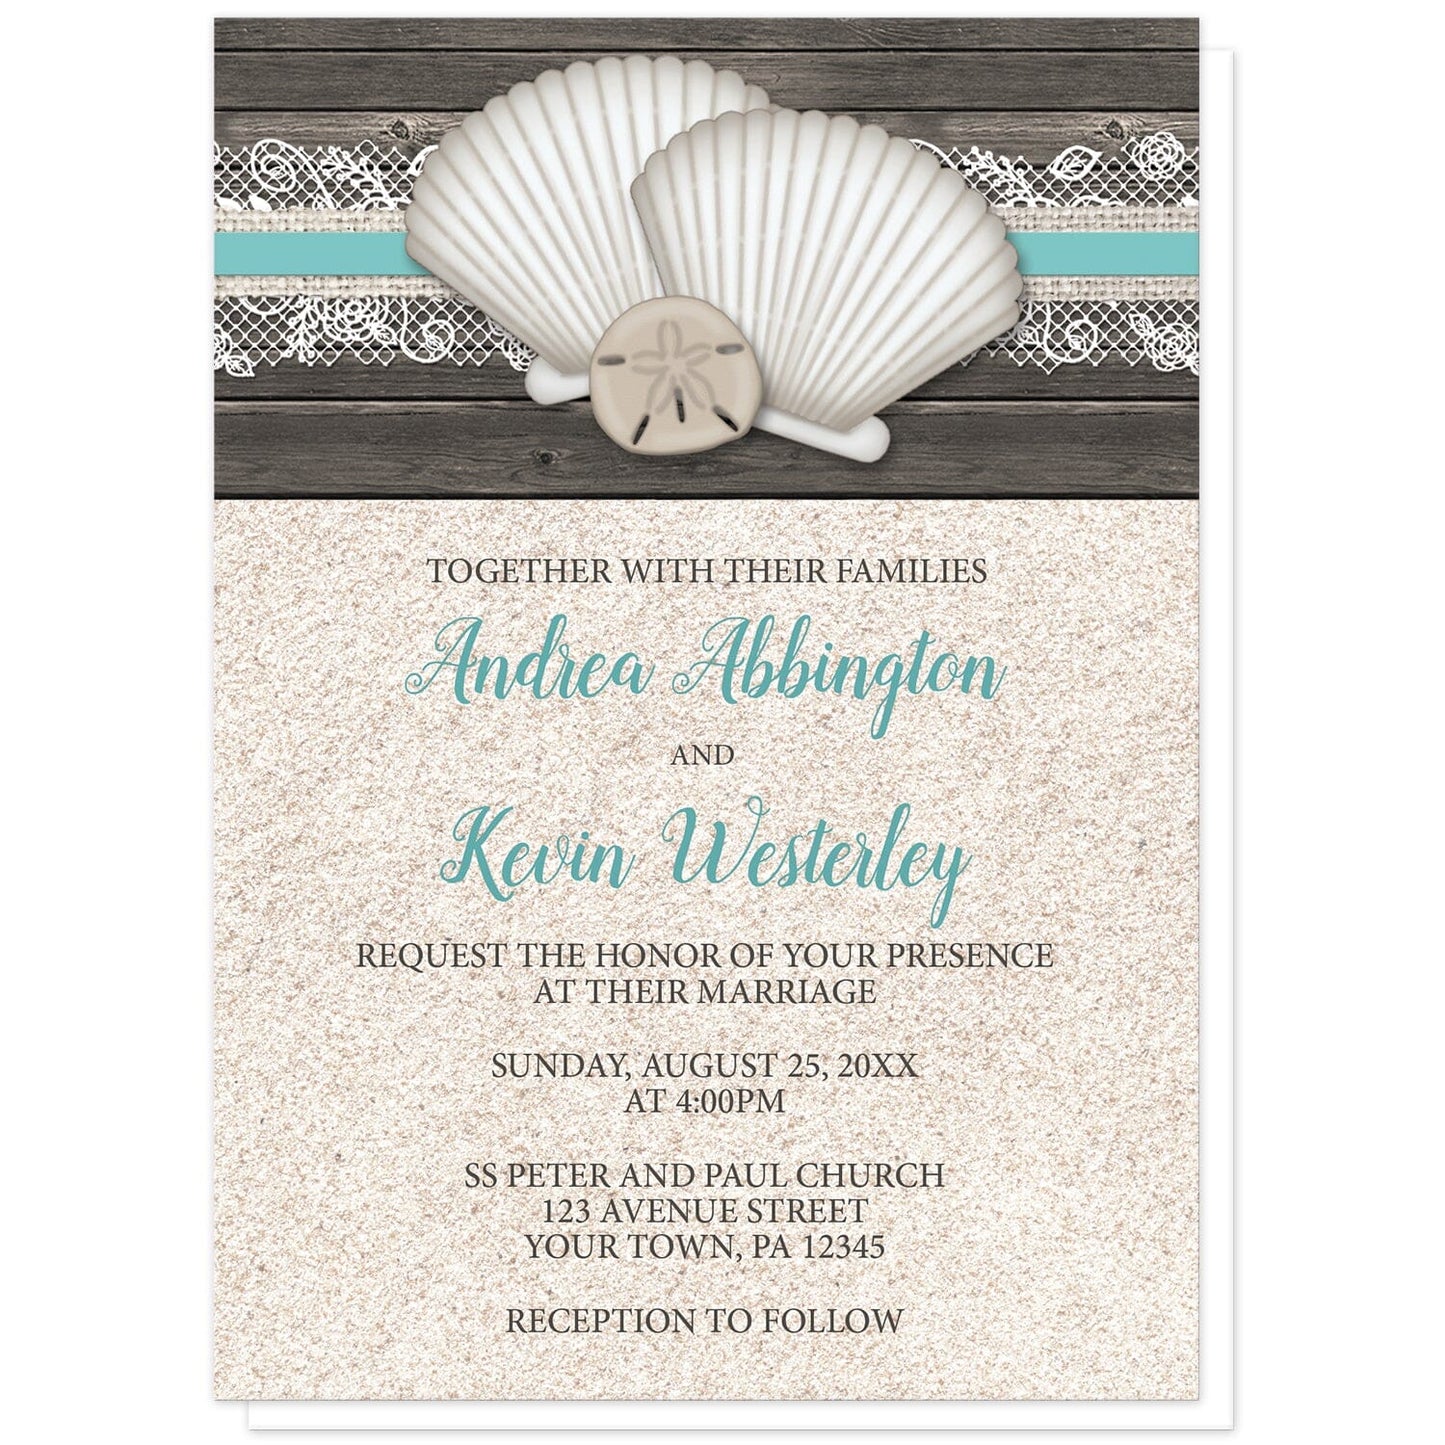 Seashell Lace Wood and Sand Beach Wedding Invitations at Artistically Invited. Rustic seashell lace wood and sand beach wedding invitations with two seashells and a sand dollar on a teal, burlap and lace ribbon over a dark brown wood pattern along the top. Your personalized marriage celebration details are custom printed in dark brown and teal over a beige sand background design below the seashells.